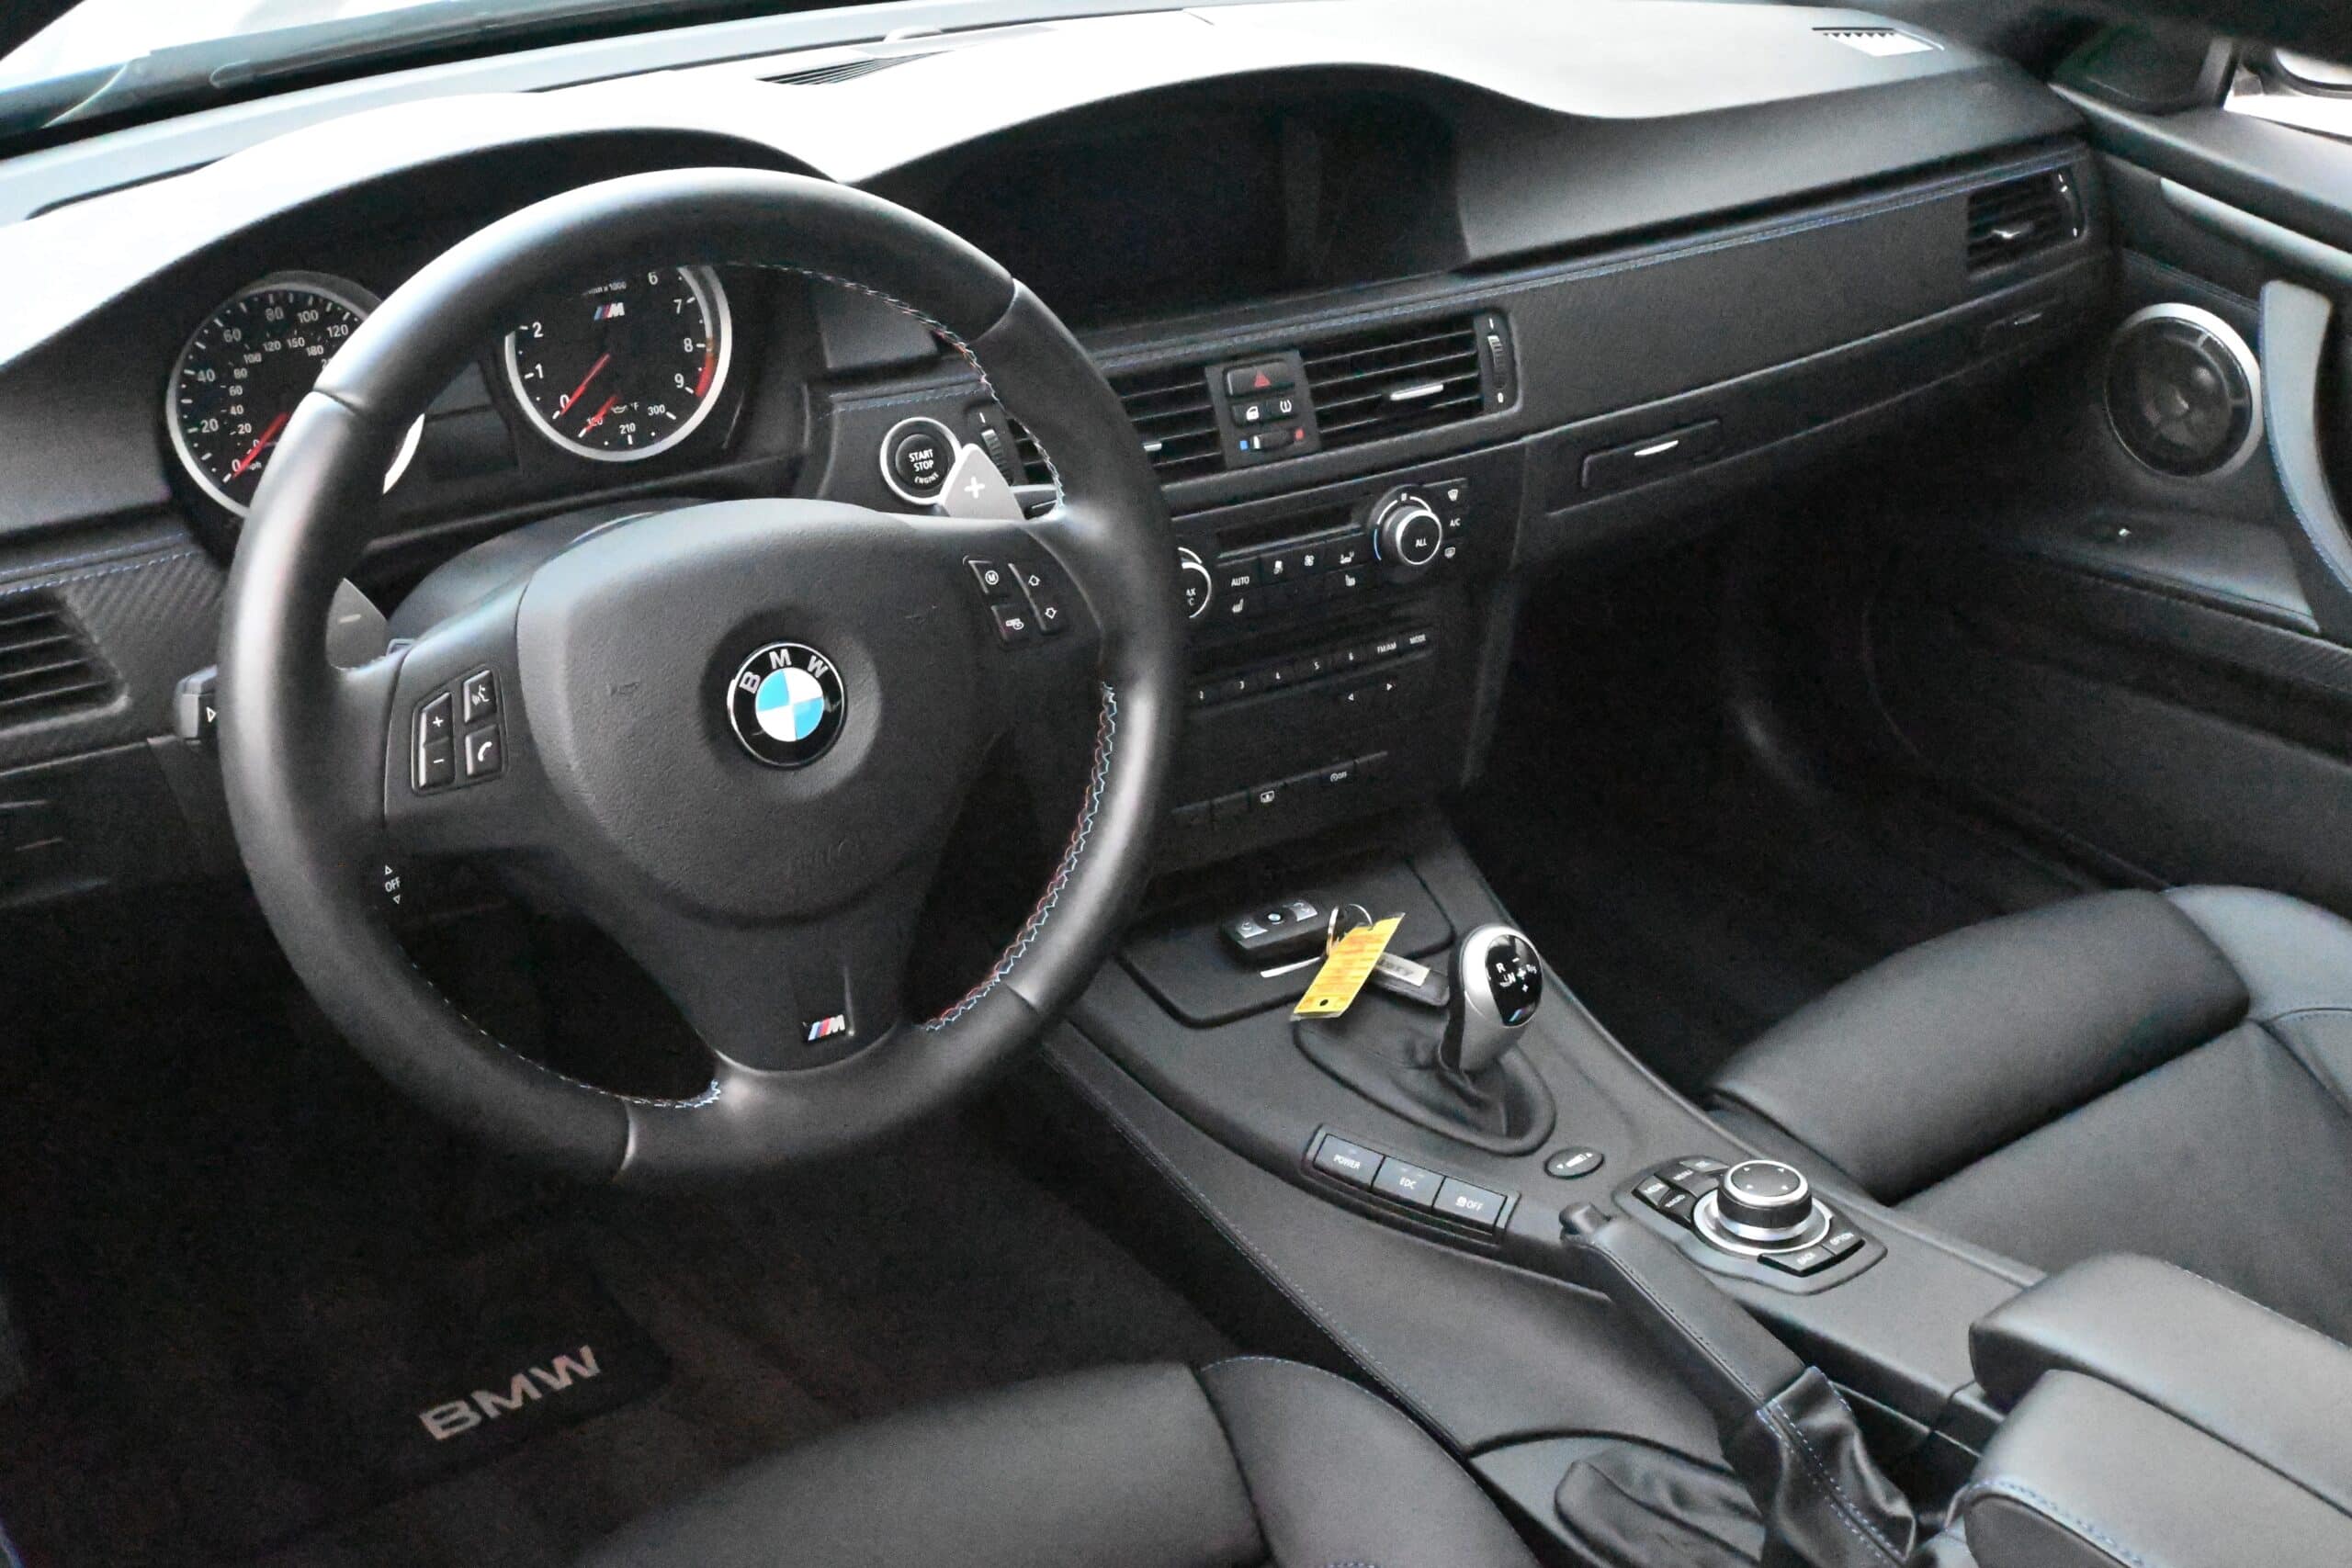 2013 BMW M3 E92 Frozen Edition Competition All Original- Only 15K Miles-1 of 72 Cars-Original Window Sticker-Mint Condition